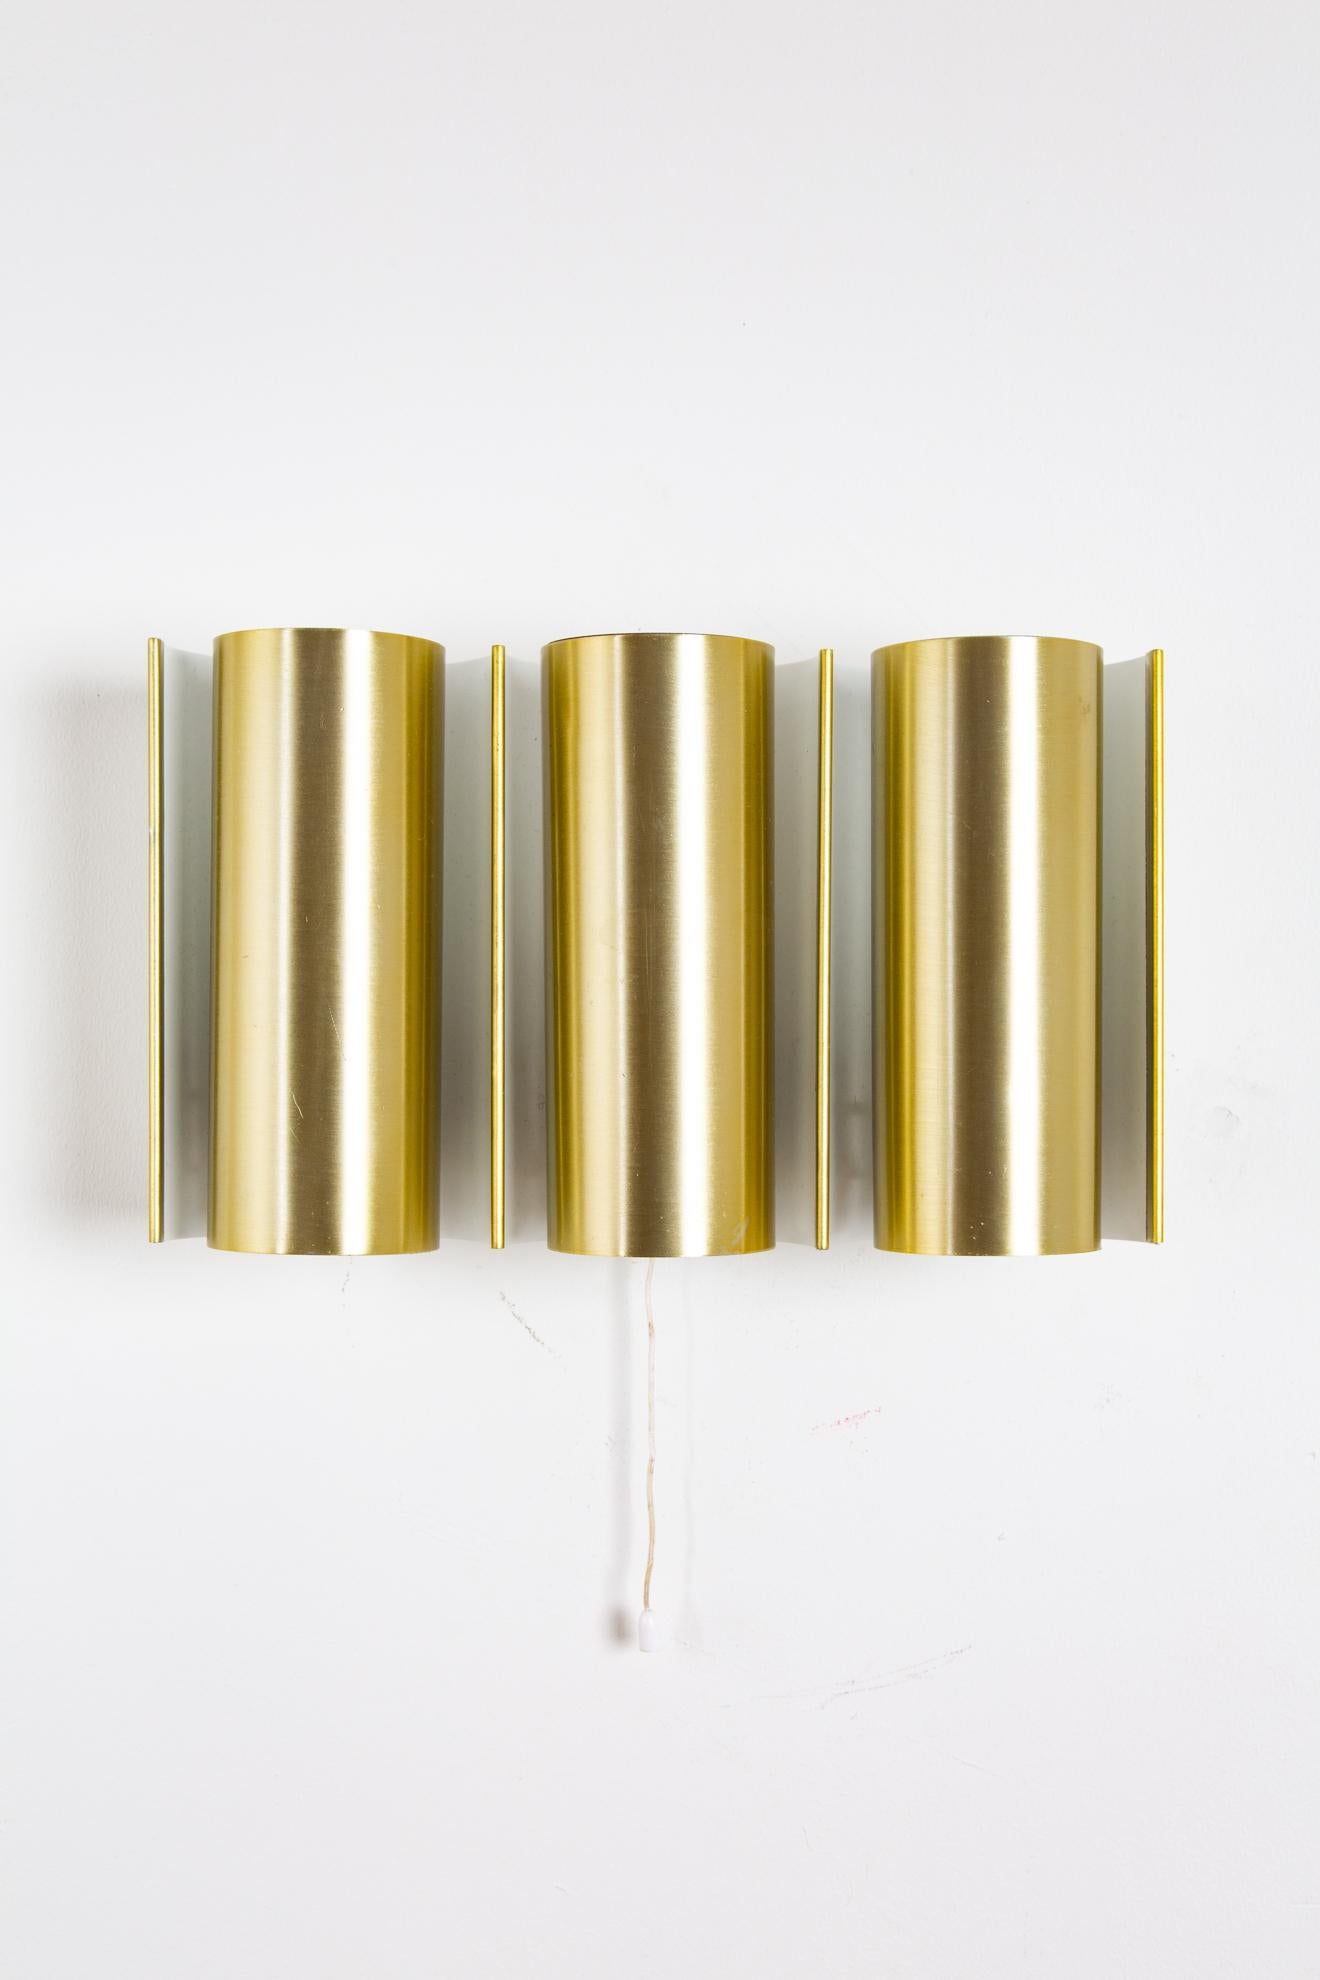 Mid-20th Century Swedish Brass Wall Lamp in the Style of RAAK For Sale